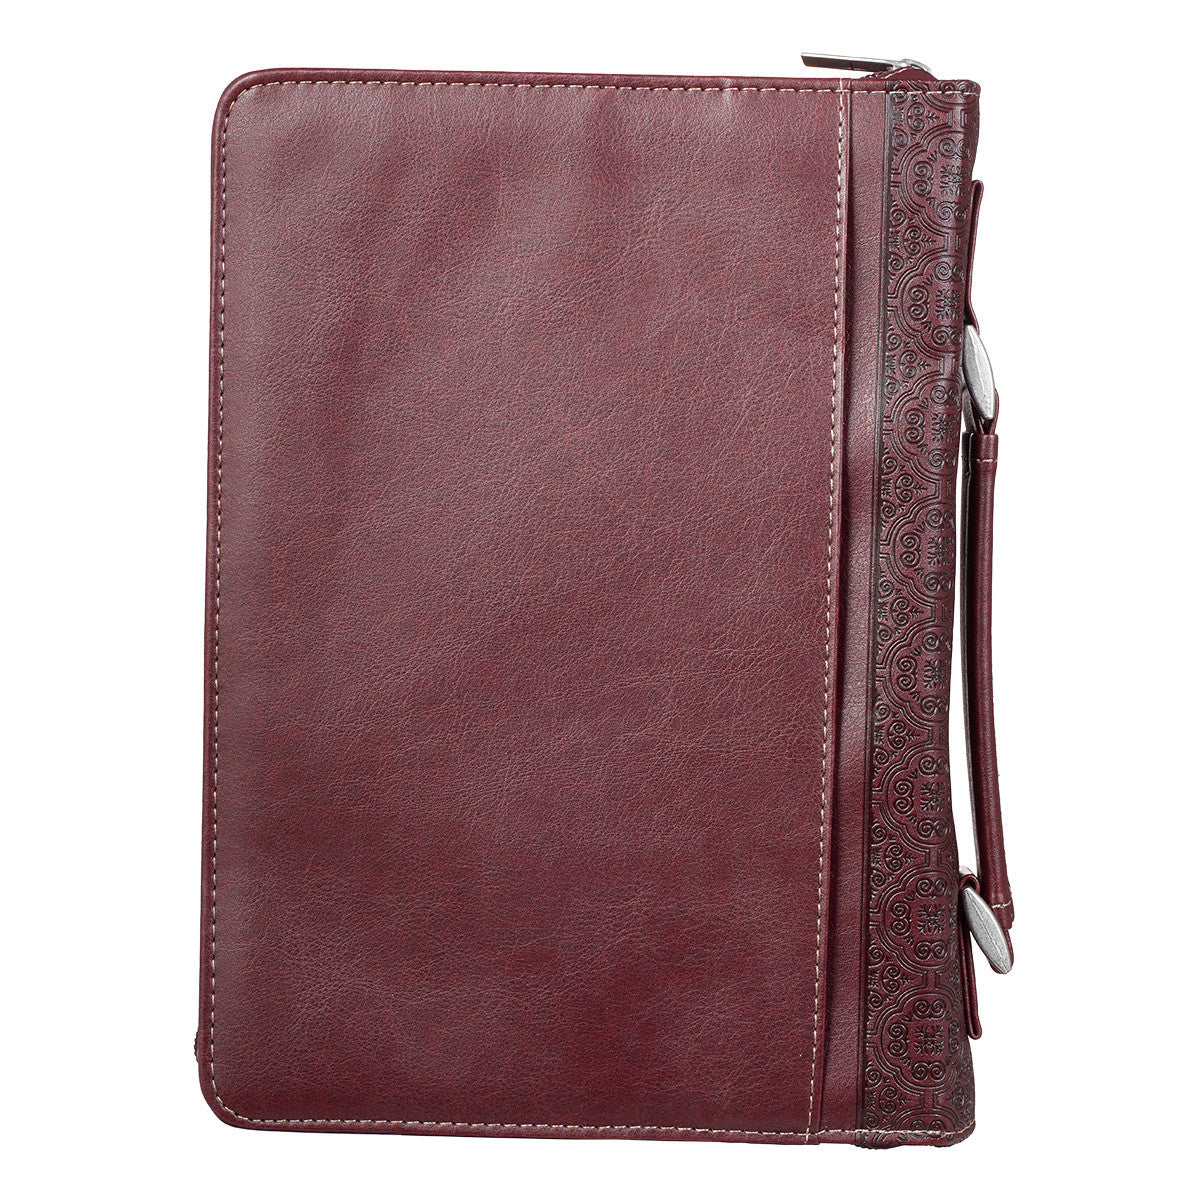 The Lord's Prayer Brown Two-tone Faux Leather Classic Bible Cover